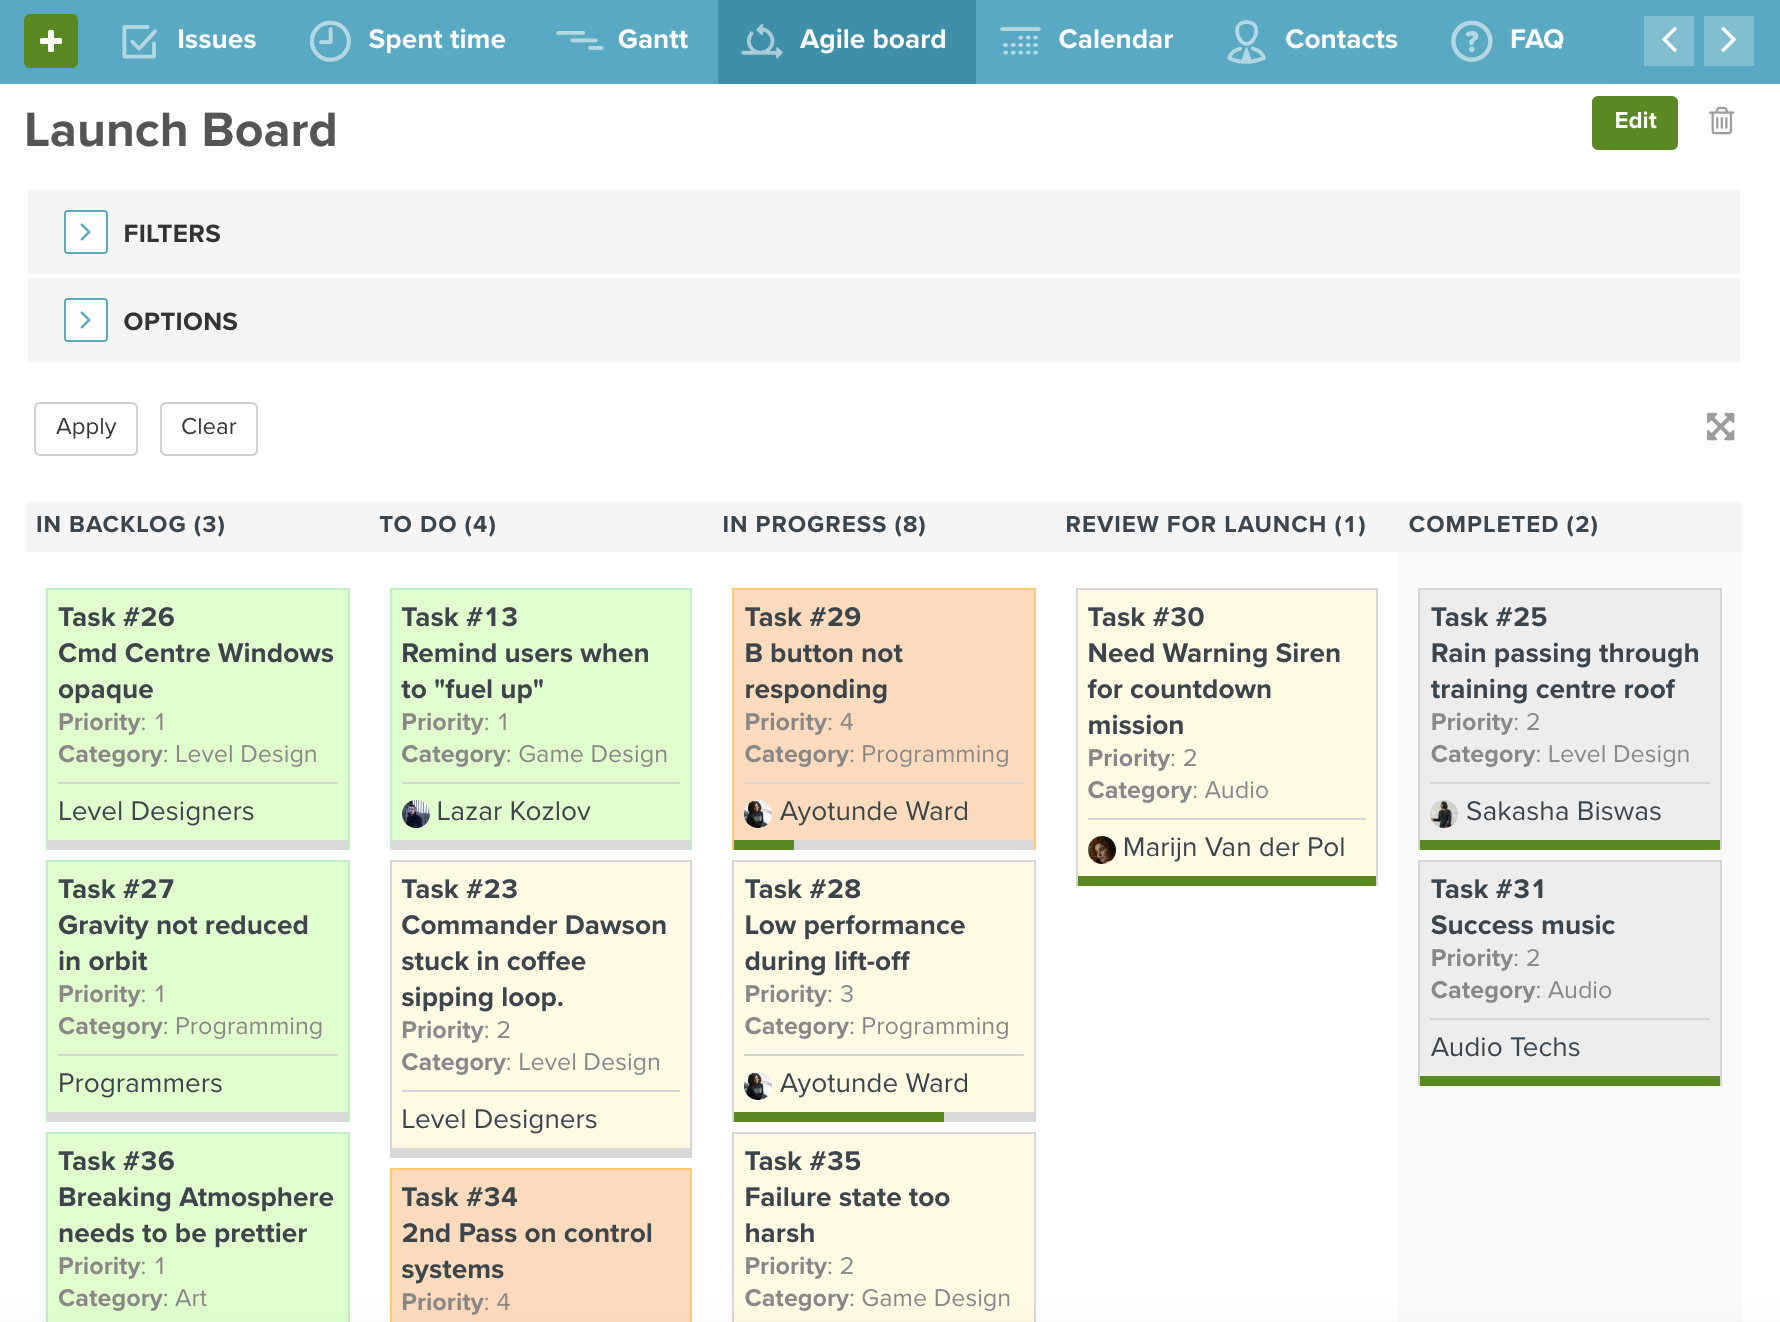 Agile board showing issues according to priority and assignee